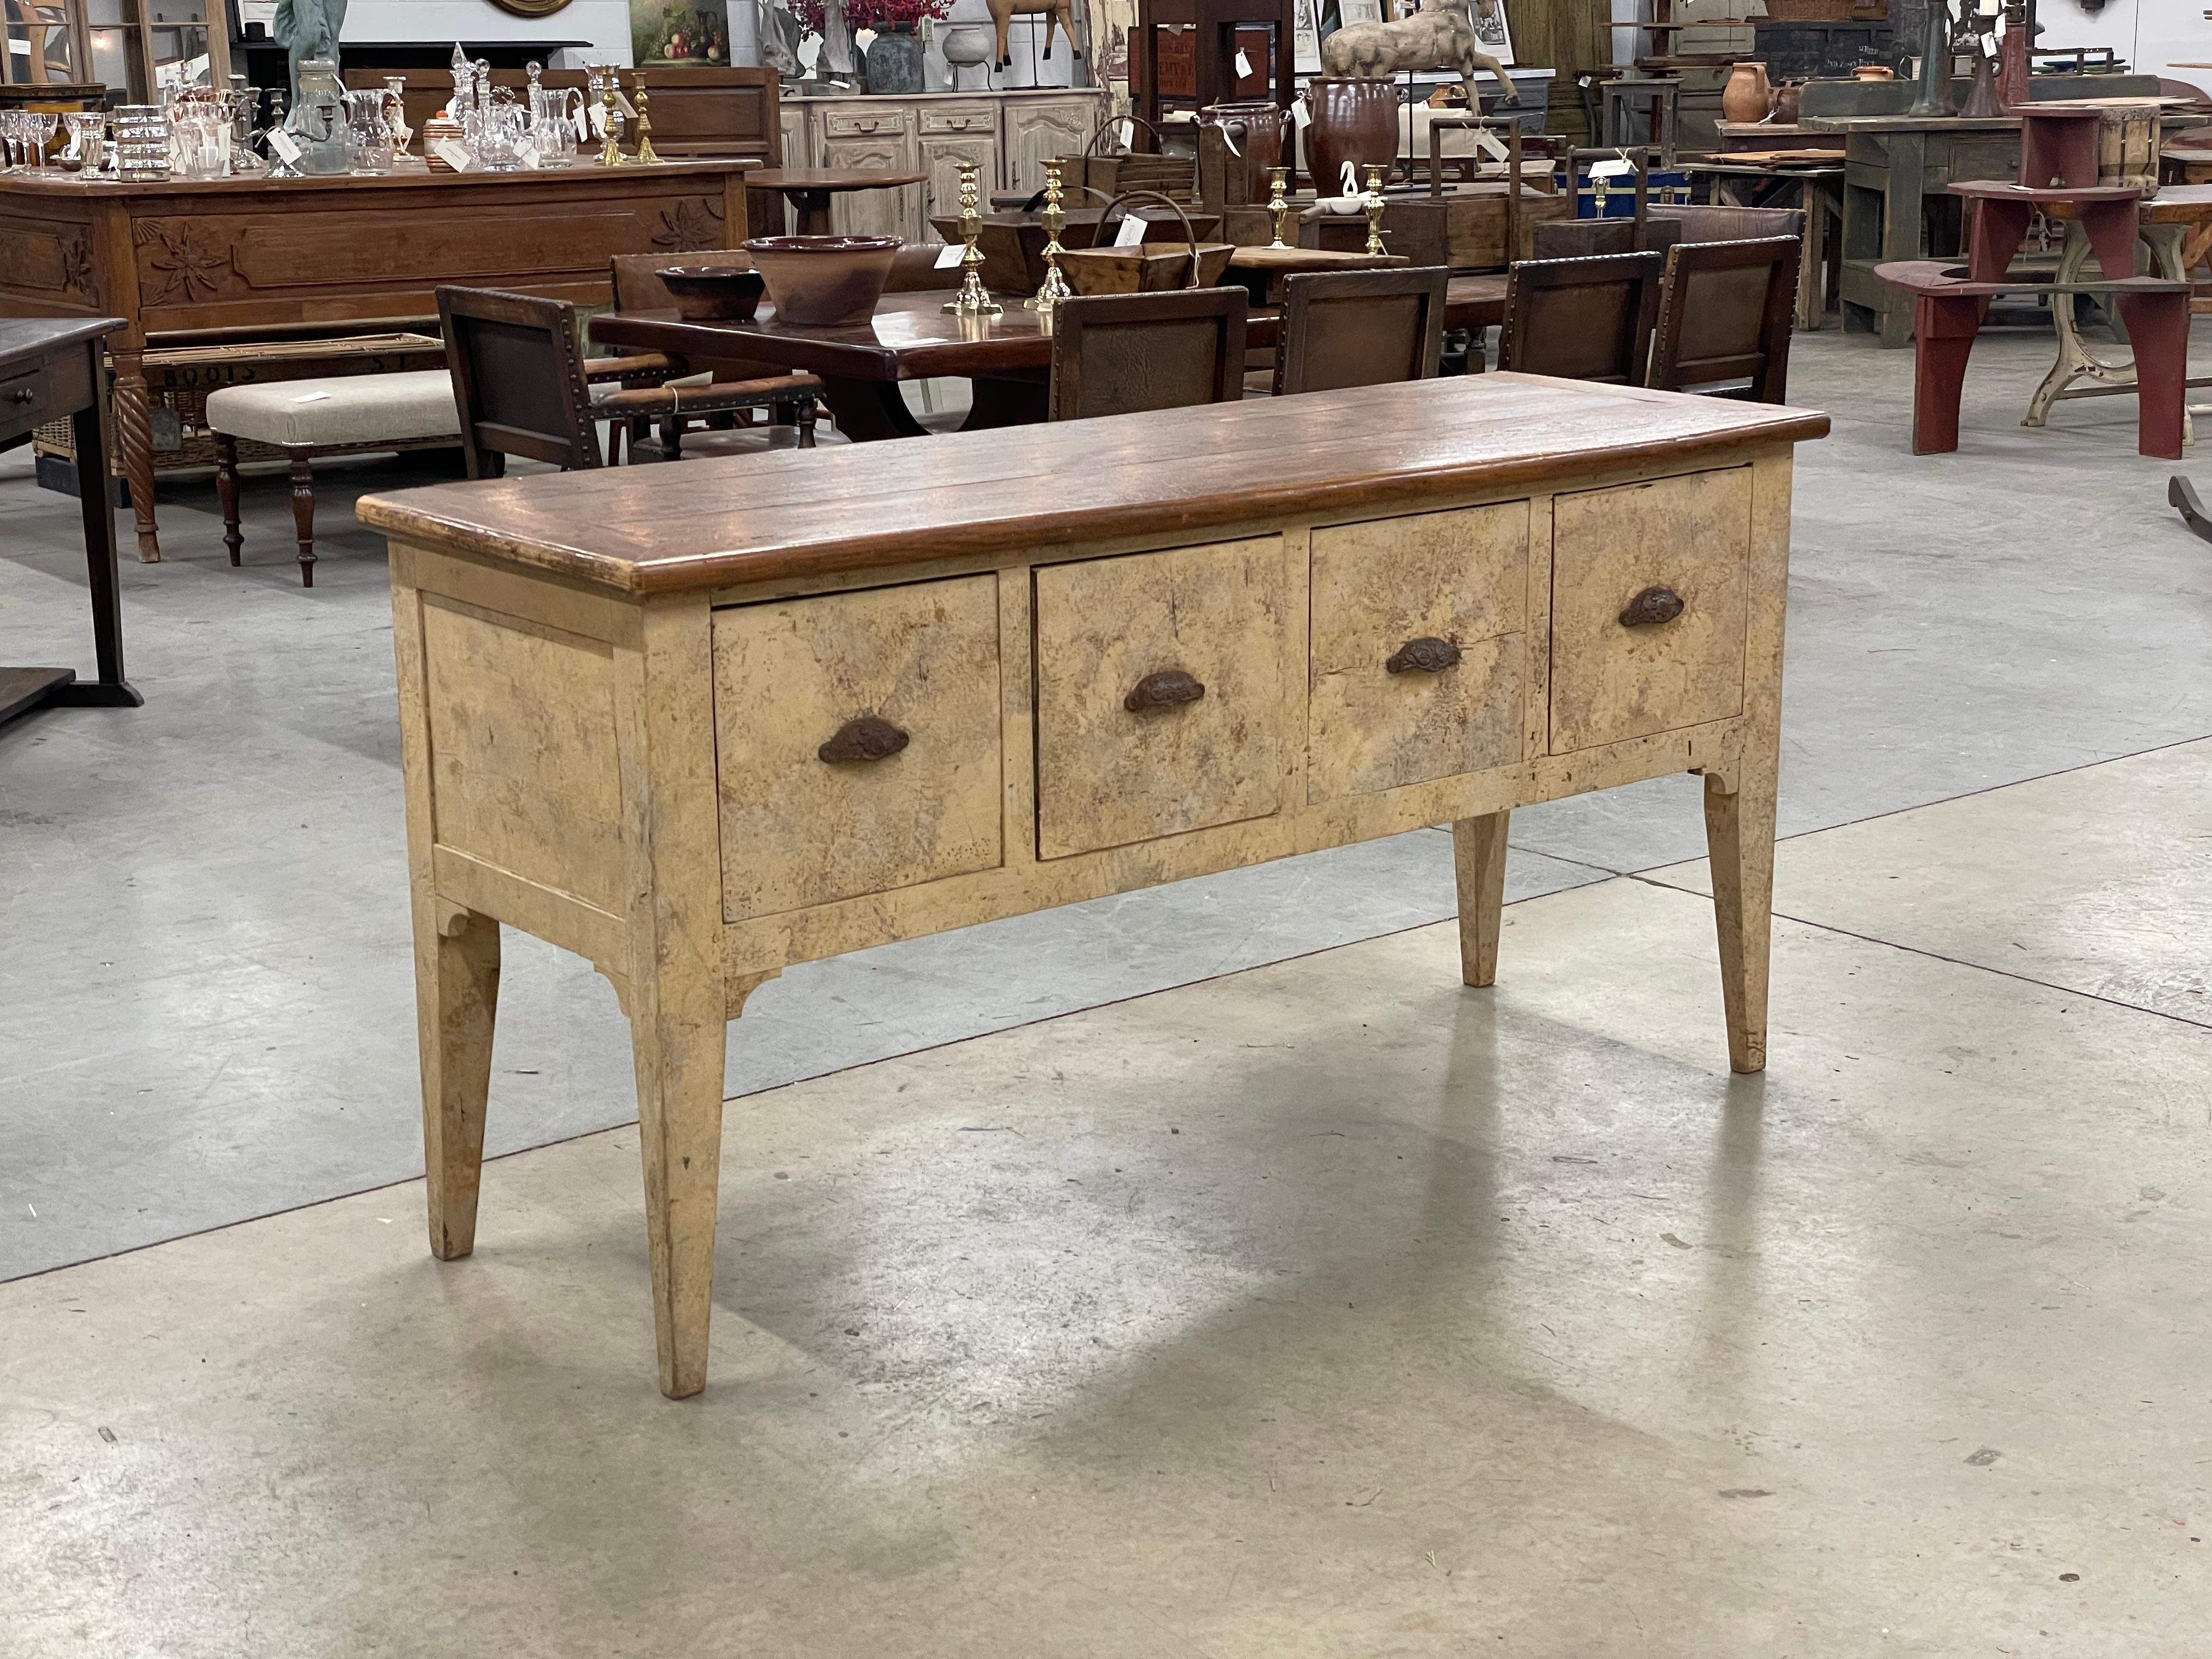 Antique French painted serving table with 4 deep dovetailed drawers. The unadorned  top sits on 4 simple slightly splayed legs. 

It has a very English feel to the design and possibly travelled across the Channel to Northern France where it was